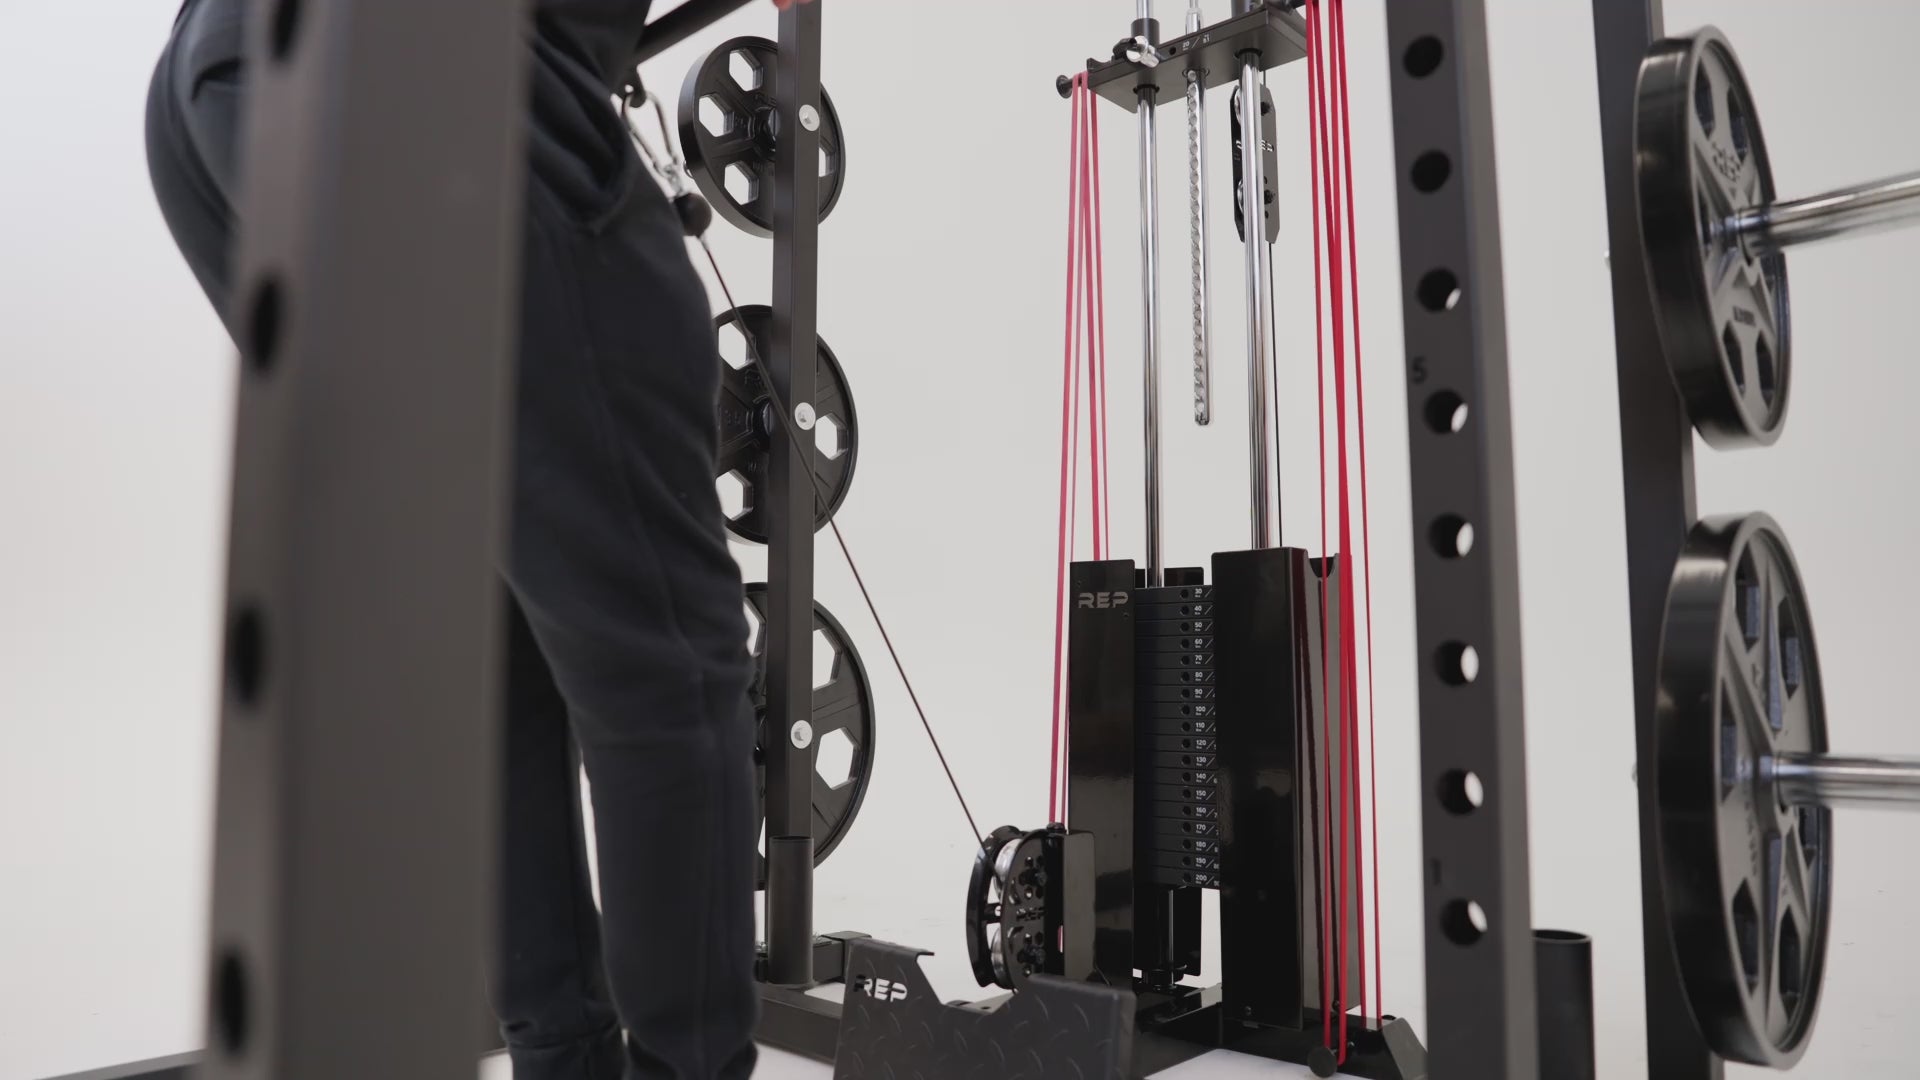 Selectorized Lat Pulldown and Low Row (1000) Series Video of Integrated Band Pegs To Add Resistance